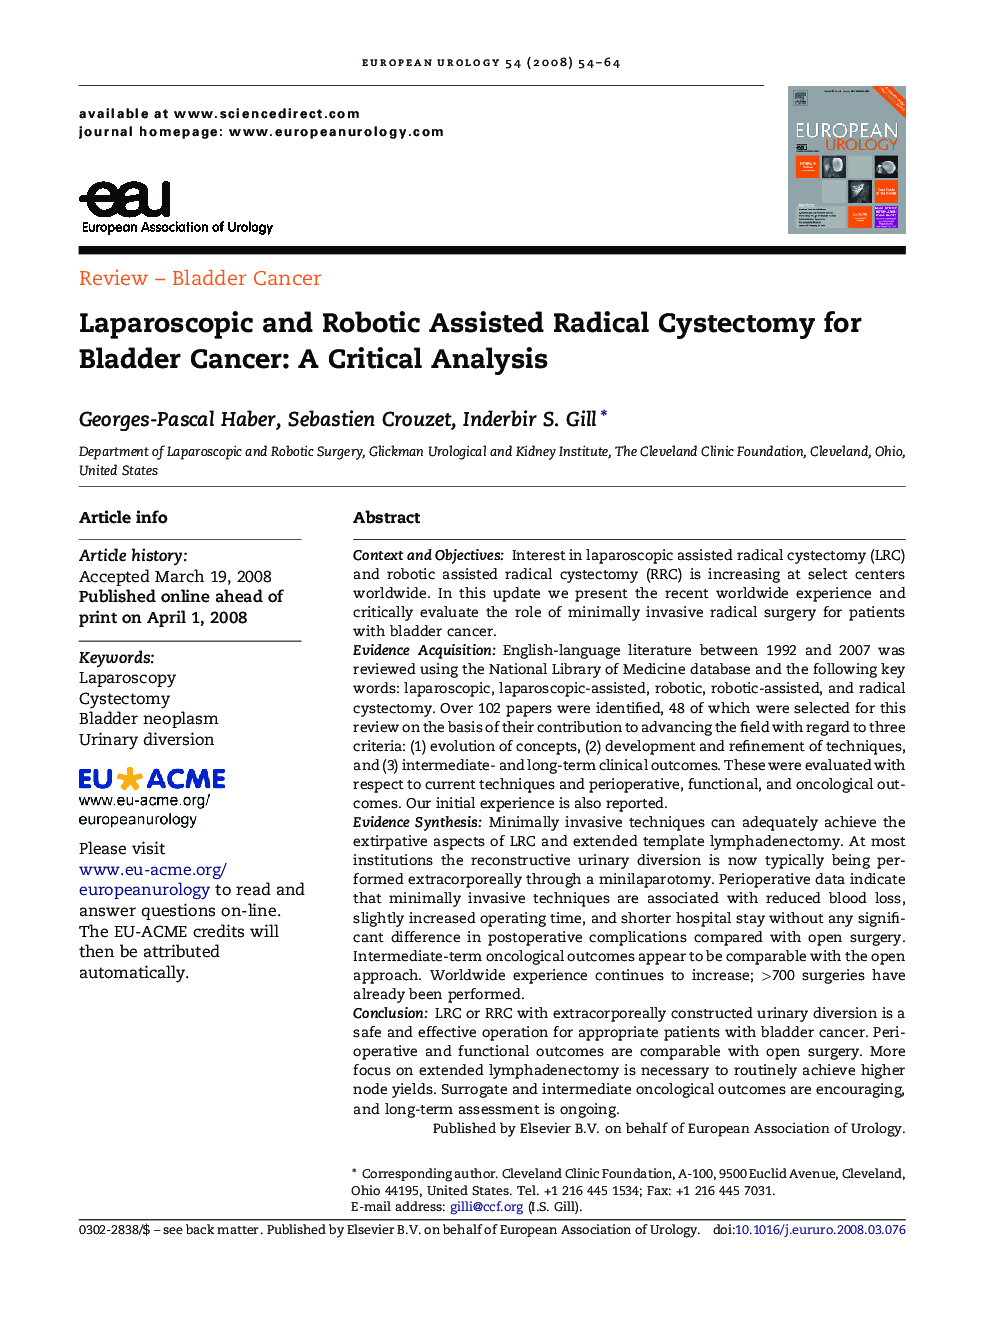 Laparoscopic and Robotic Assisted Radical Cystectomy for Bladder Cancer: A Critical Analysis 